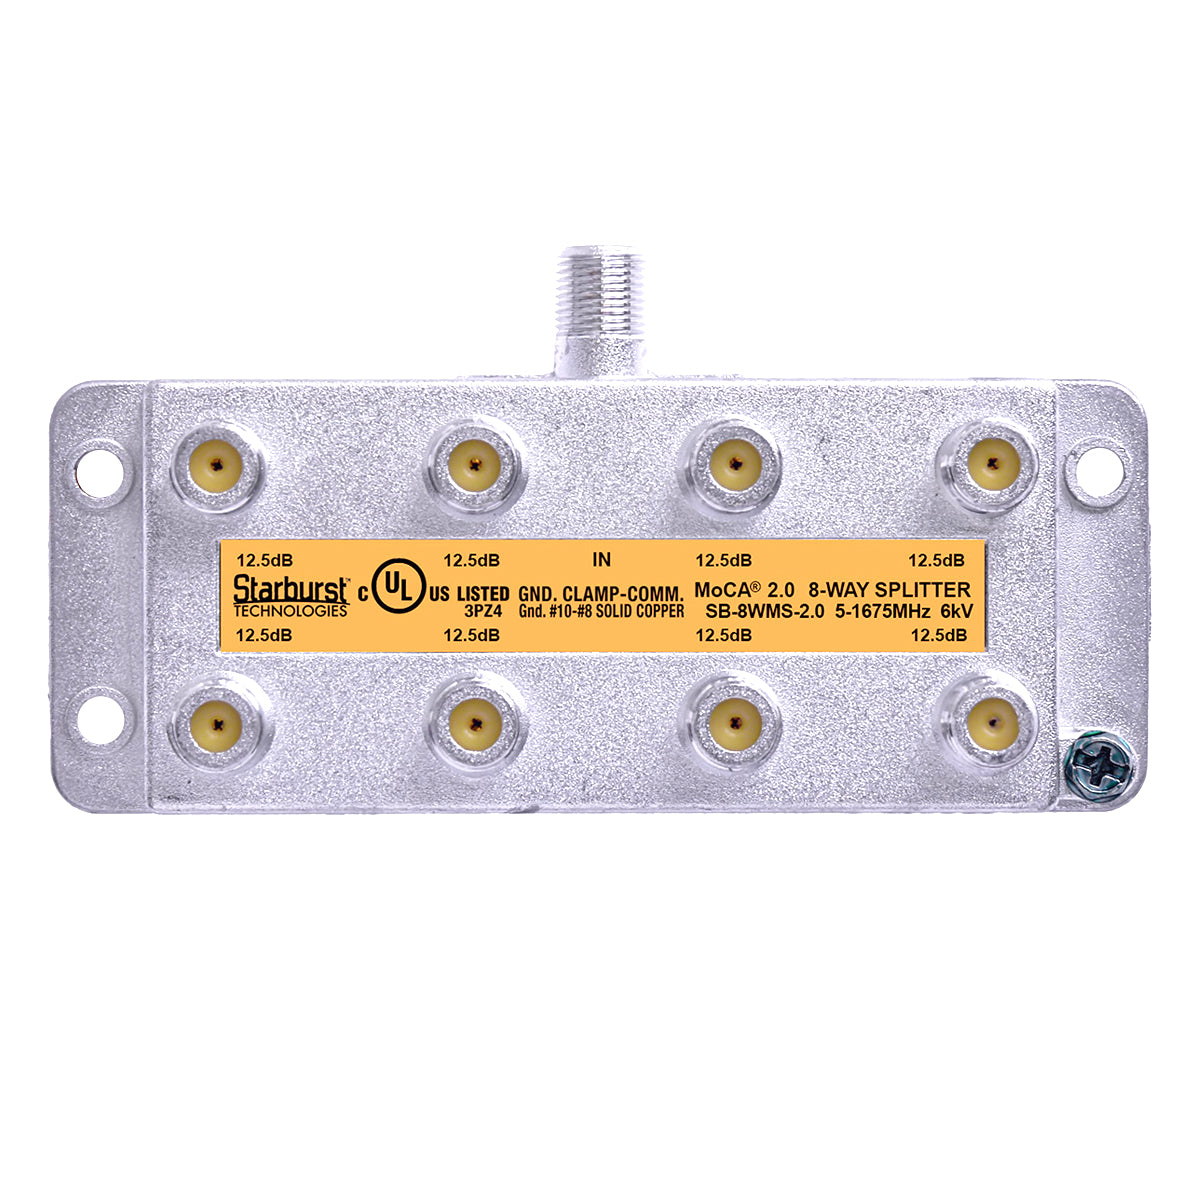 SB-8WMS-2.0 - 8 Way Vertical Coaxial Cable Splitter, 6Kv Rated, 5-1675 MHz Wide Band For Ethernet Over Coax Universal Home Networking, Compatible With 1GHz, MoCA 2.0, HPNA and DOCSIS 3.1 Networks